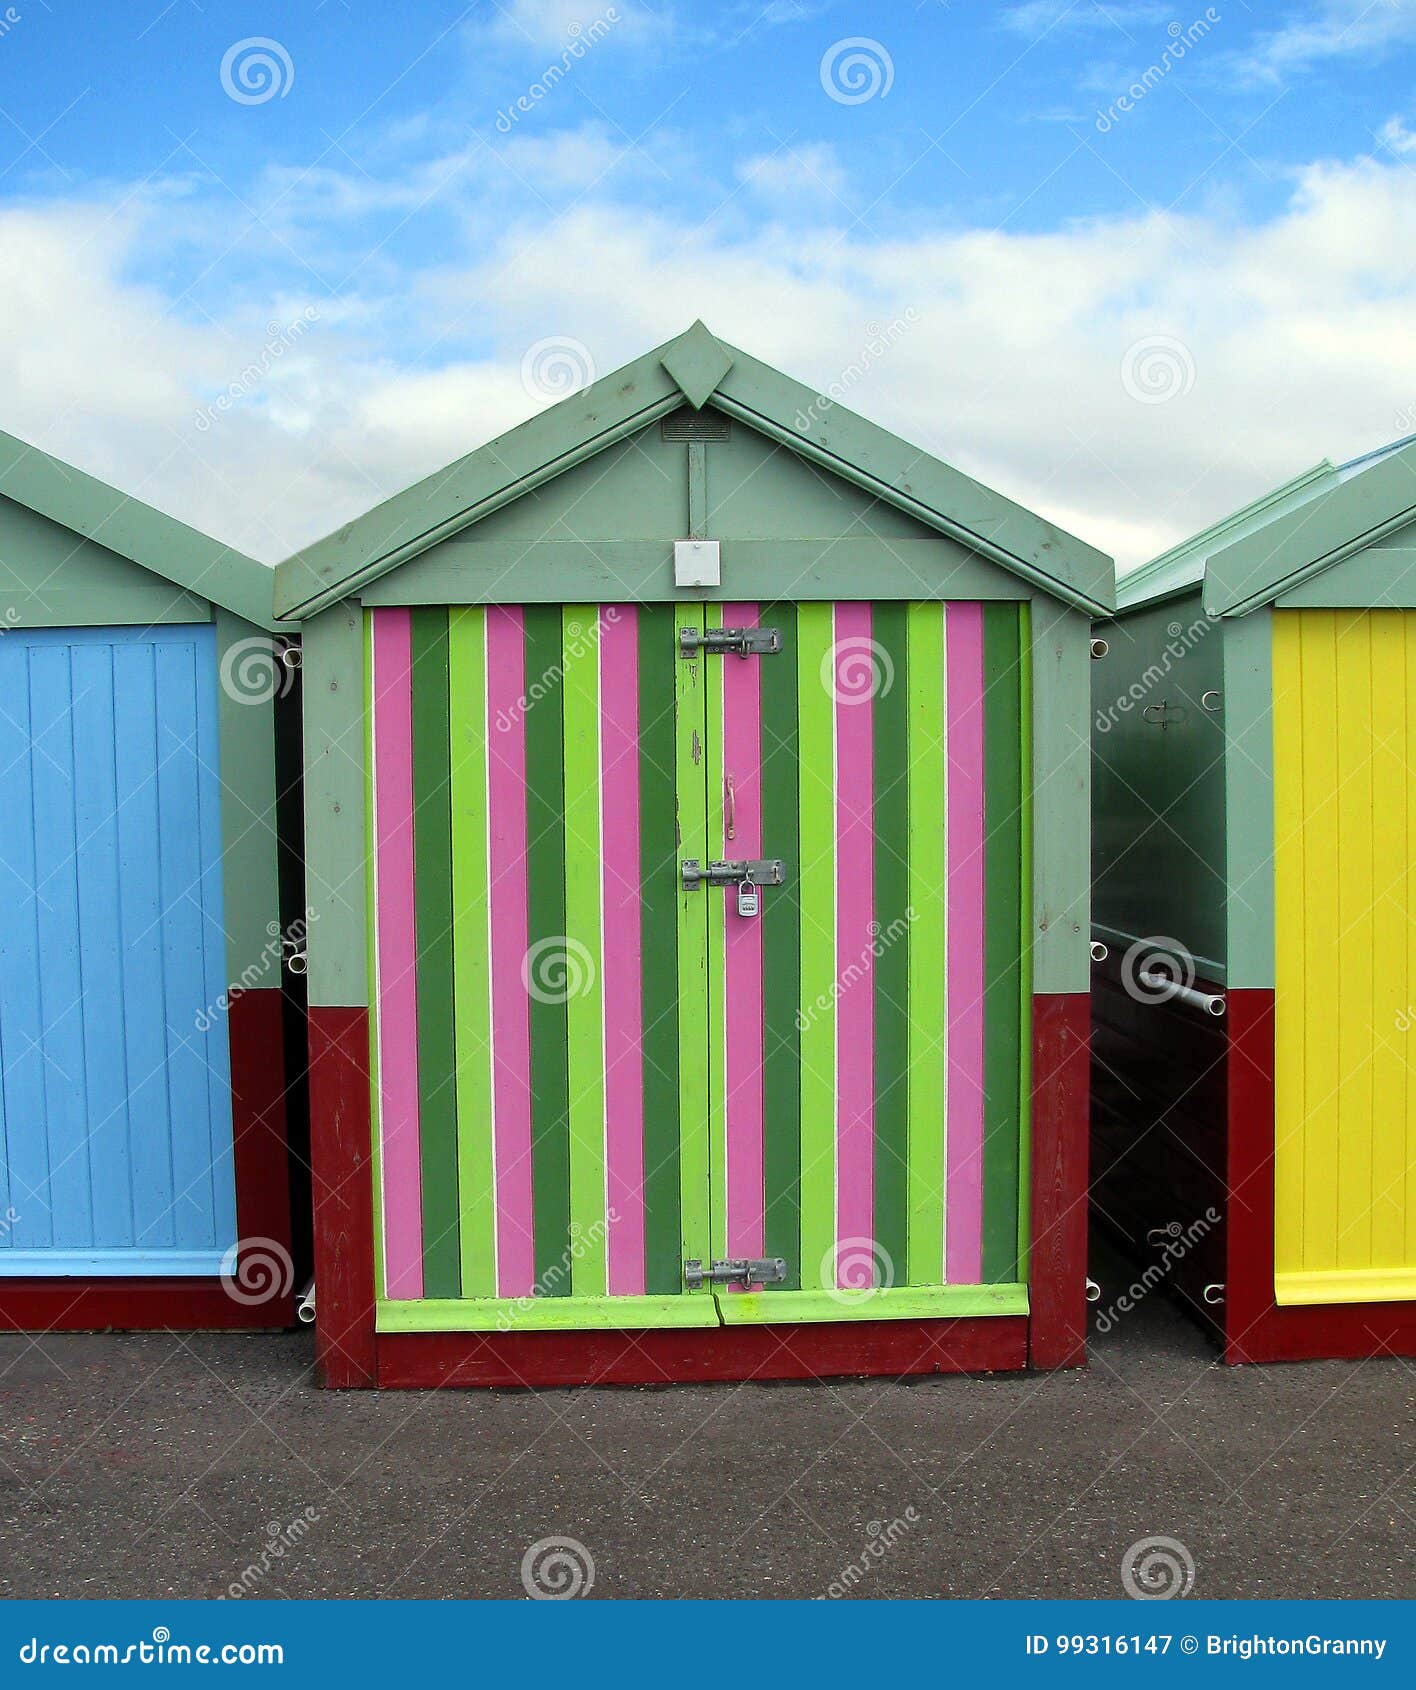 Brighton Beach huts/boxes on a blue sky sunny day with bright